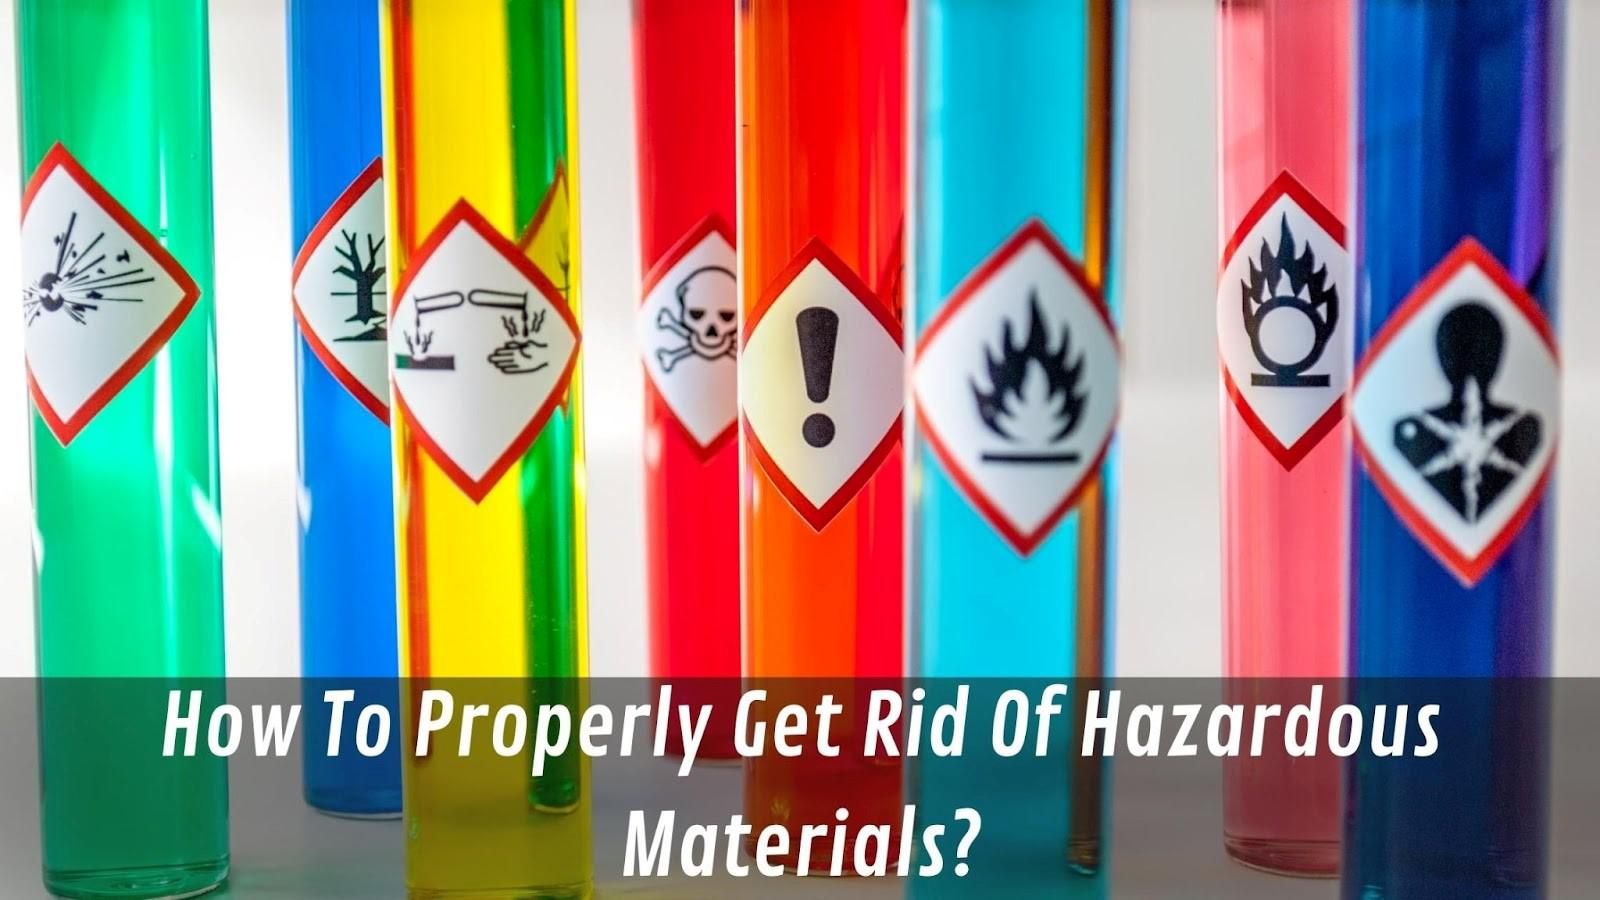 How To Properly Get Rid Of Hazardous Materials?